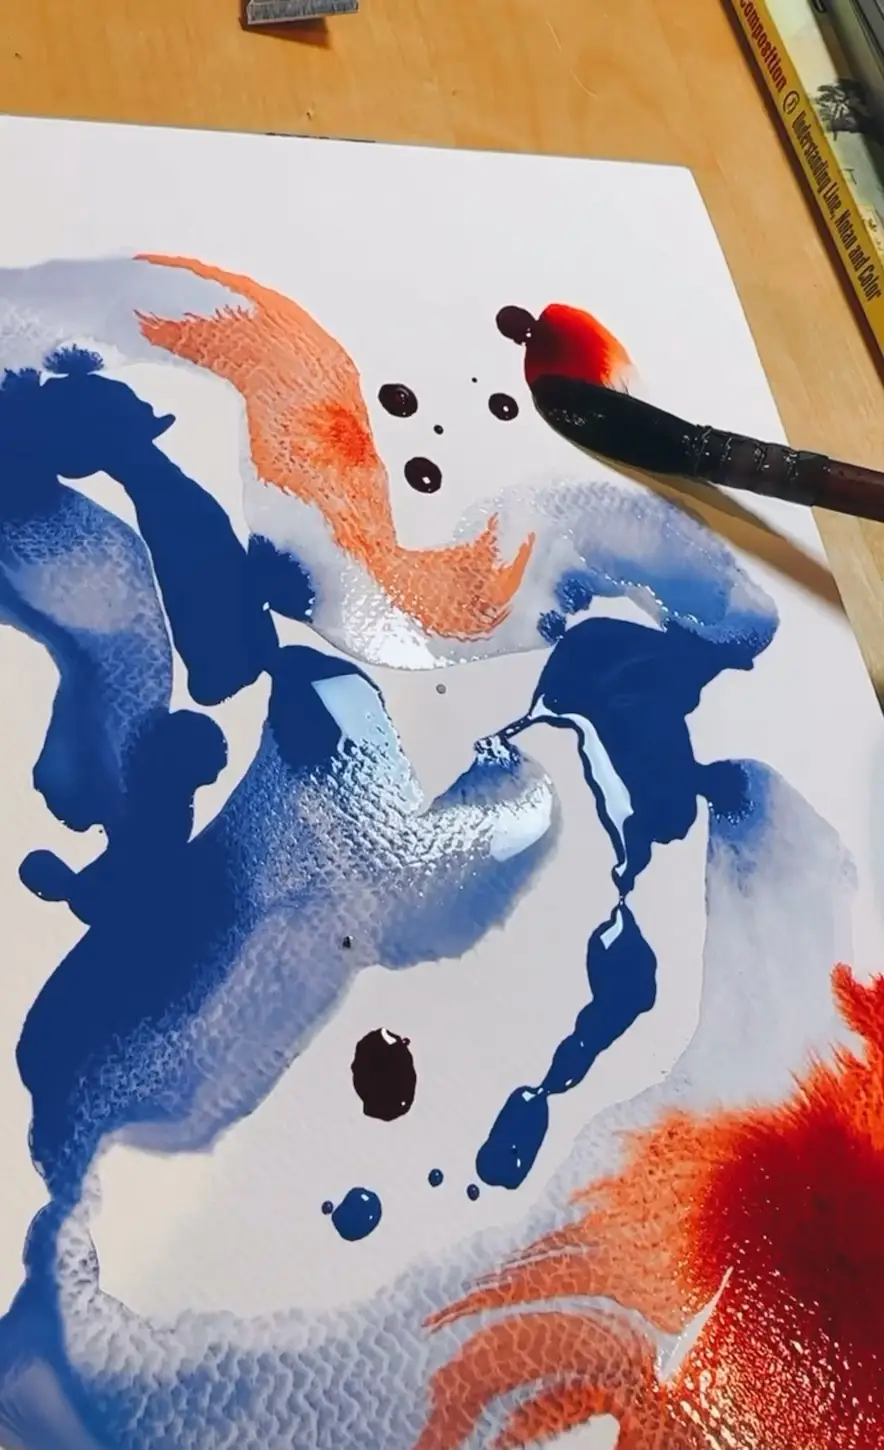 Metallic Watercolors, Video published by Cocoboat